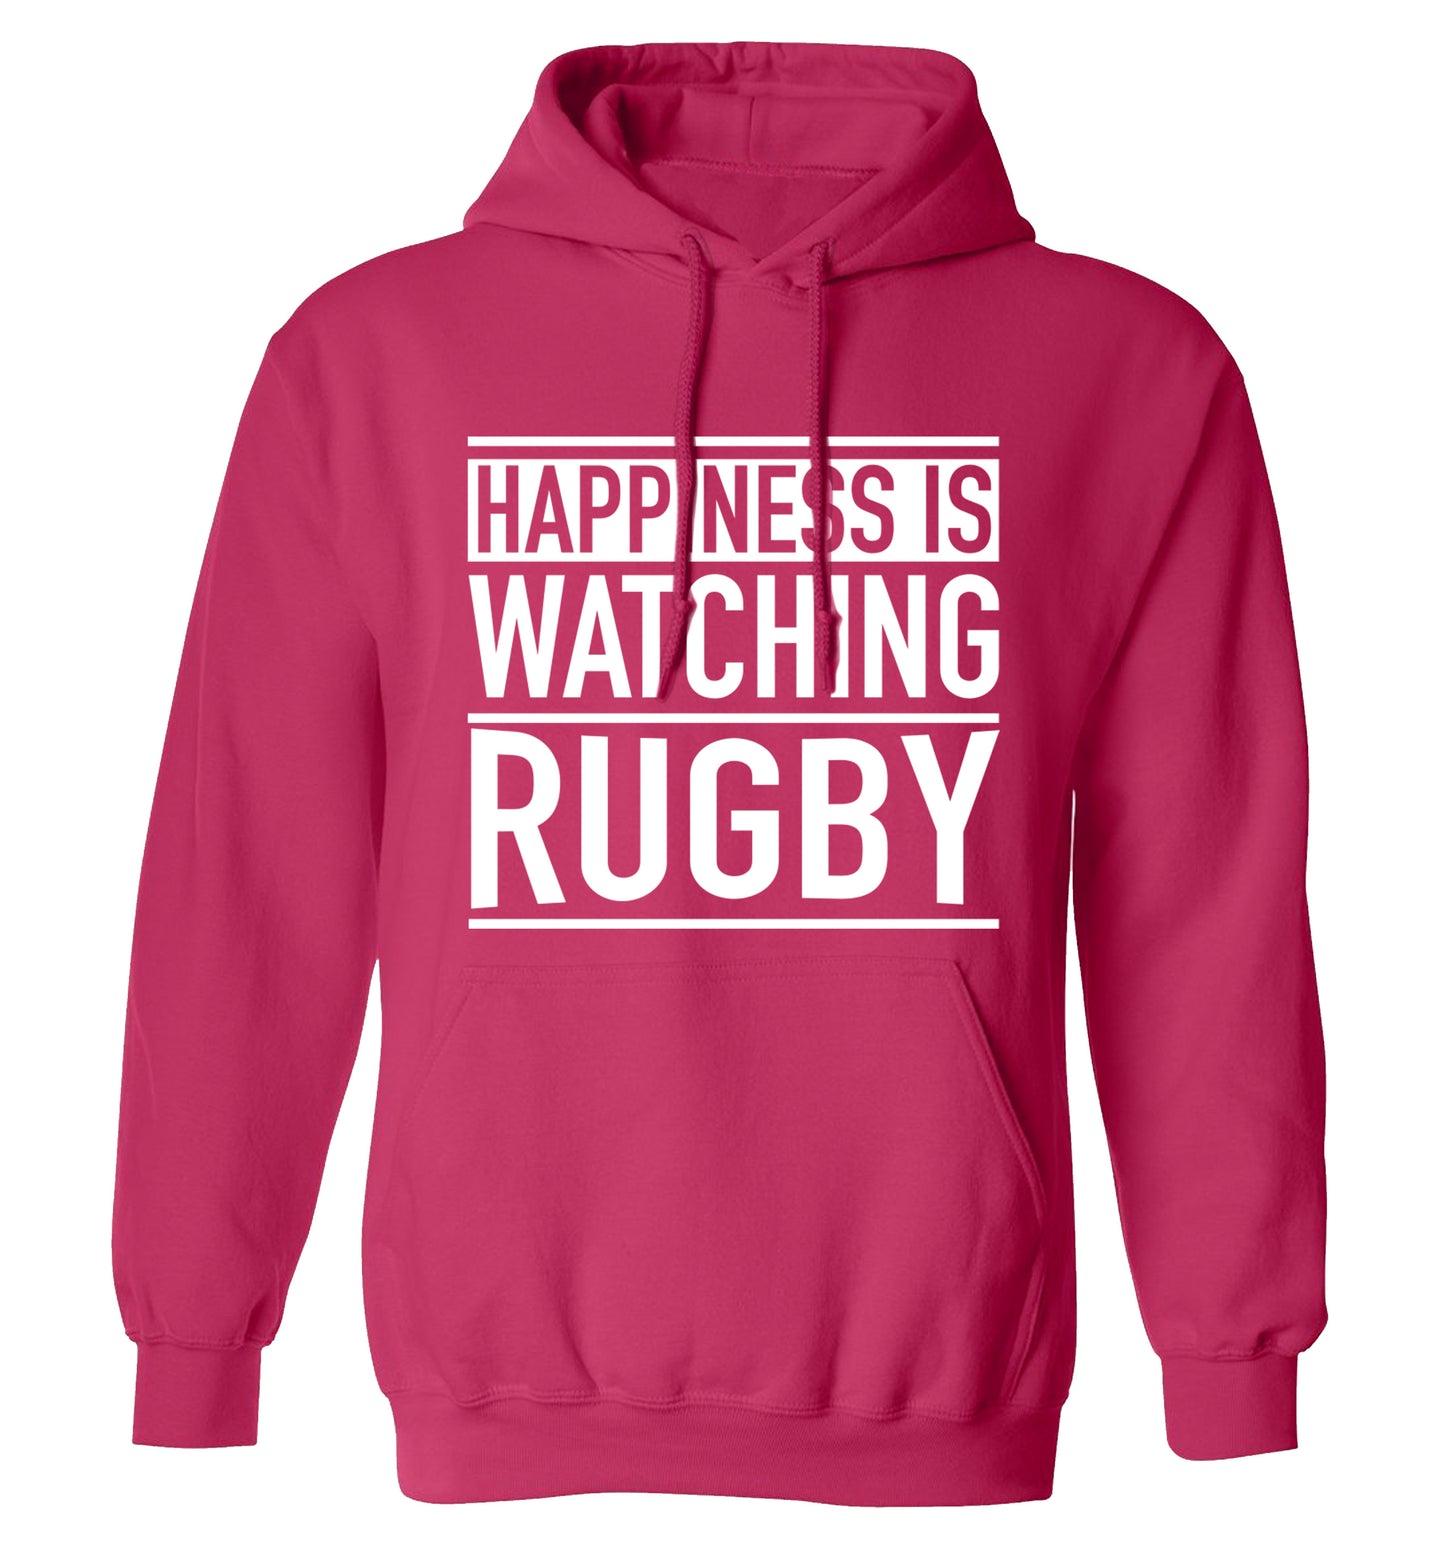 Happiness is watching rugby adults unisex pink hoodie 2XL